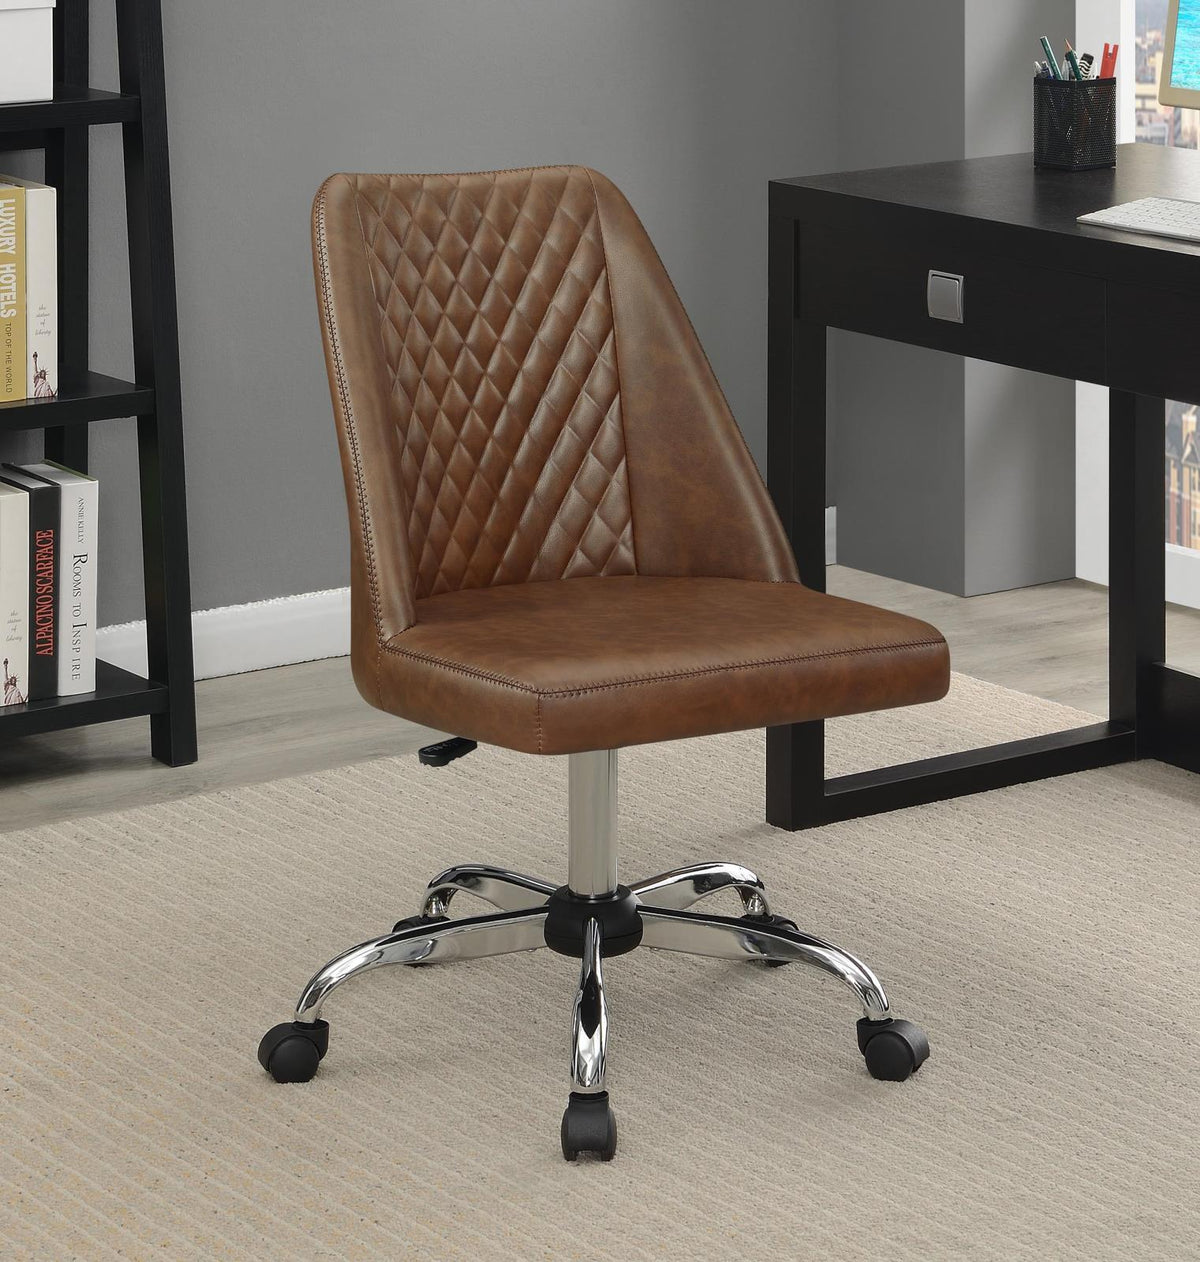 Althea Upholstered Tufted Back Office Chair Brown and Chrome - Half Price Furniture